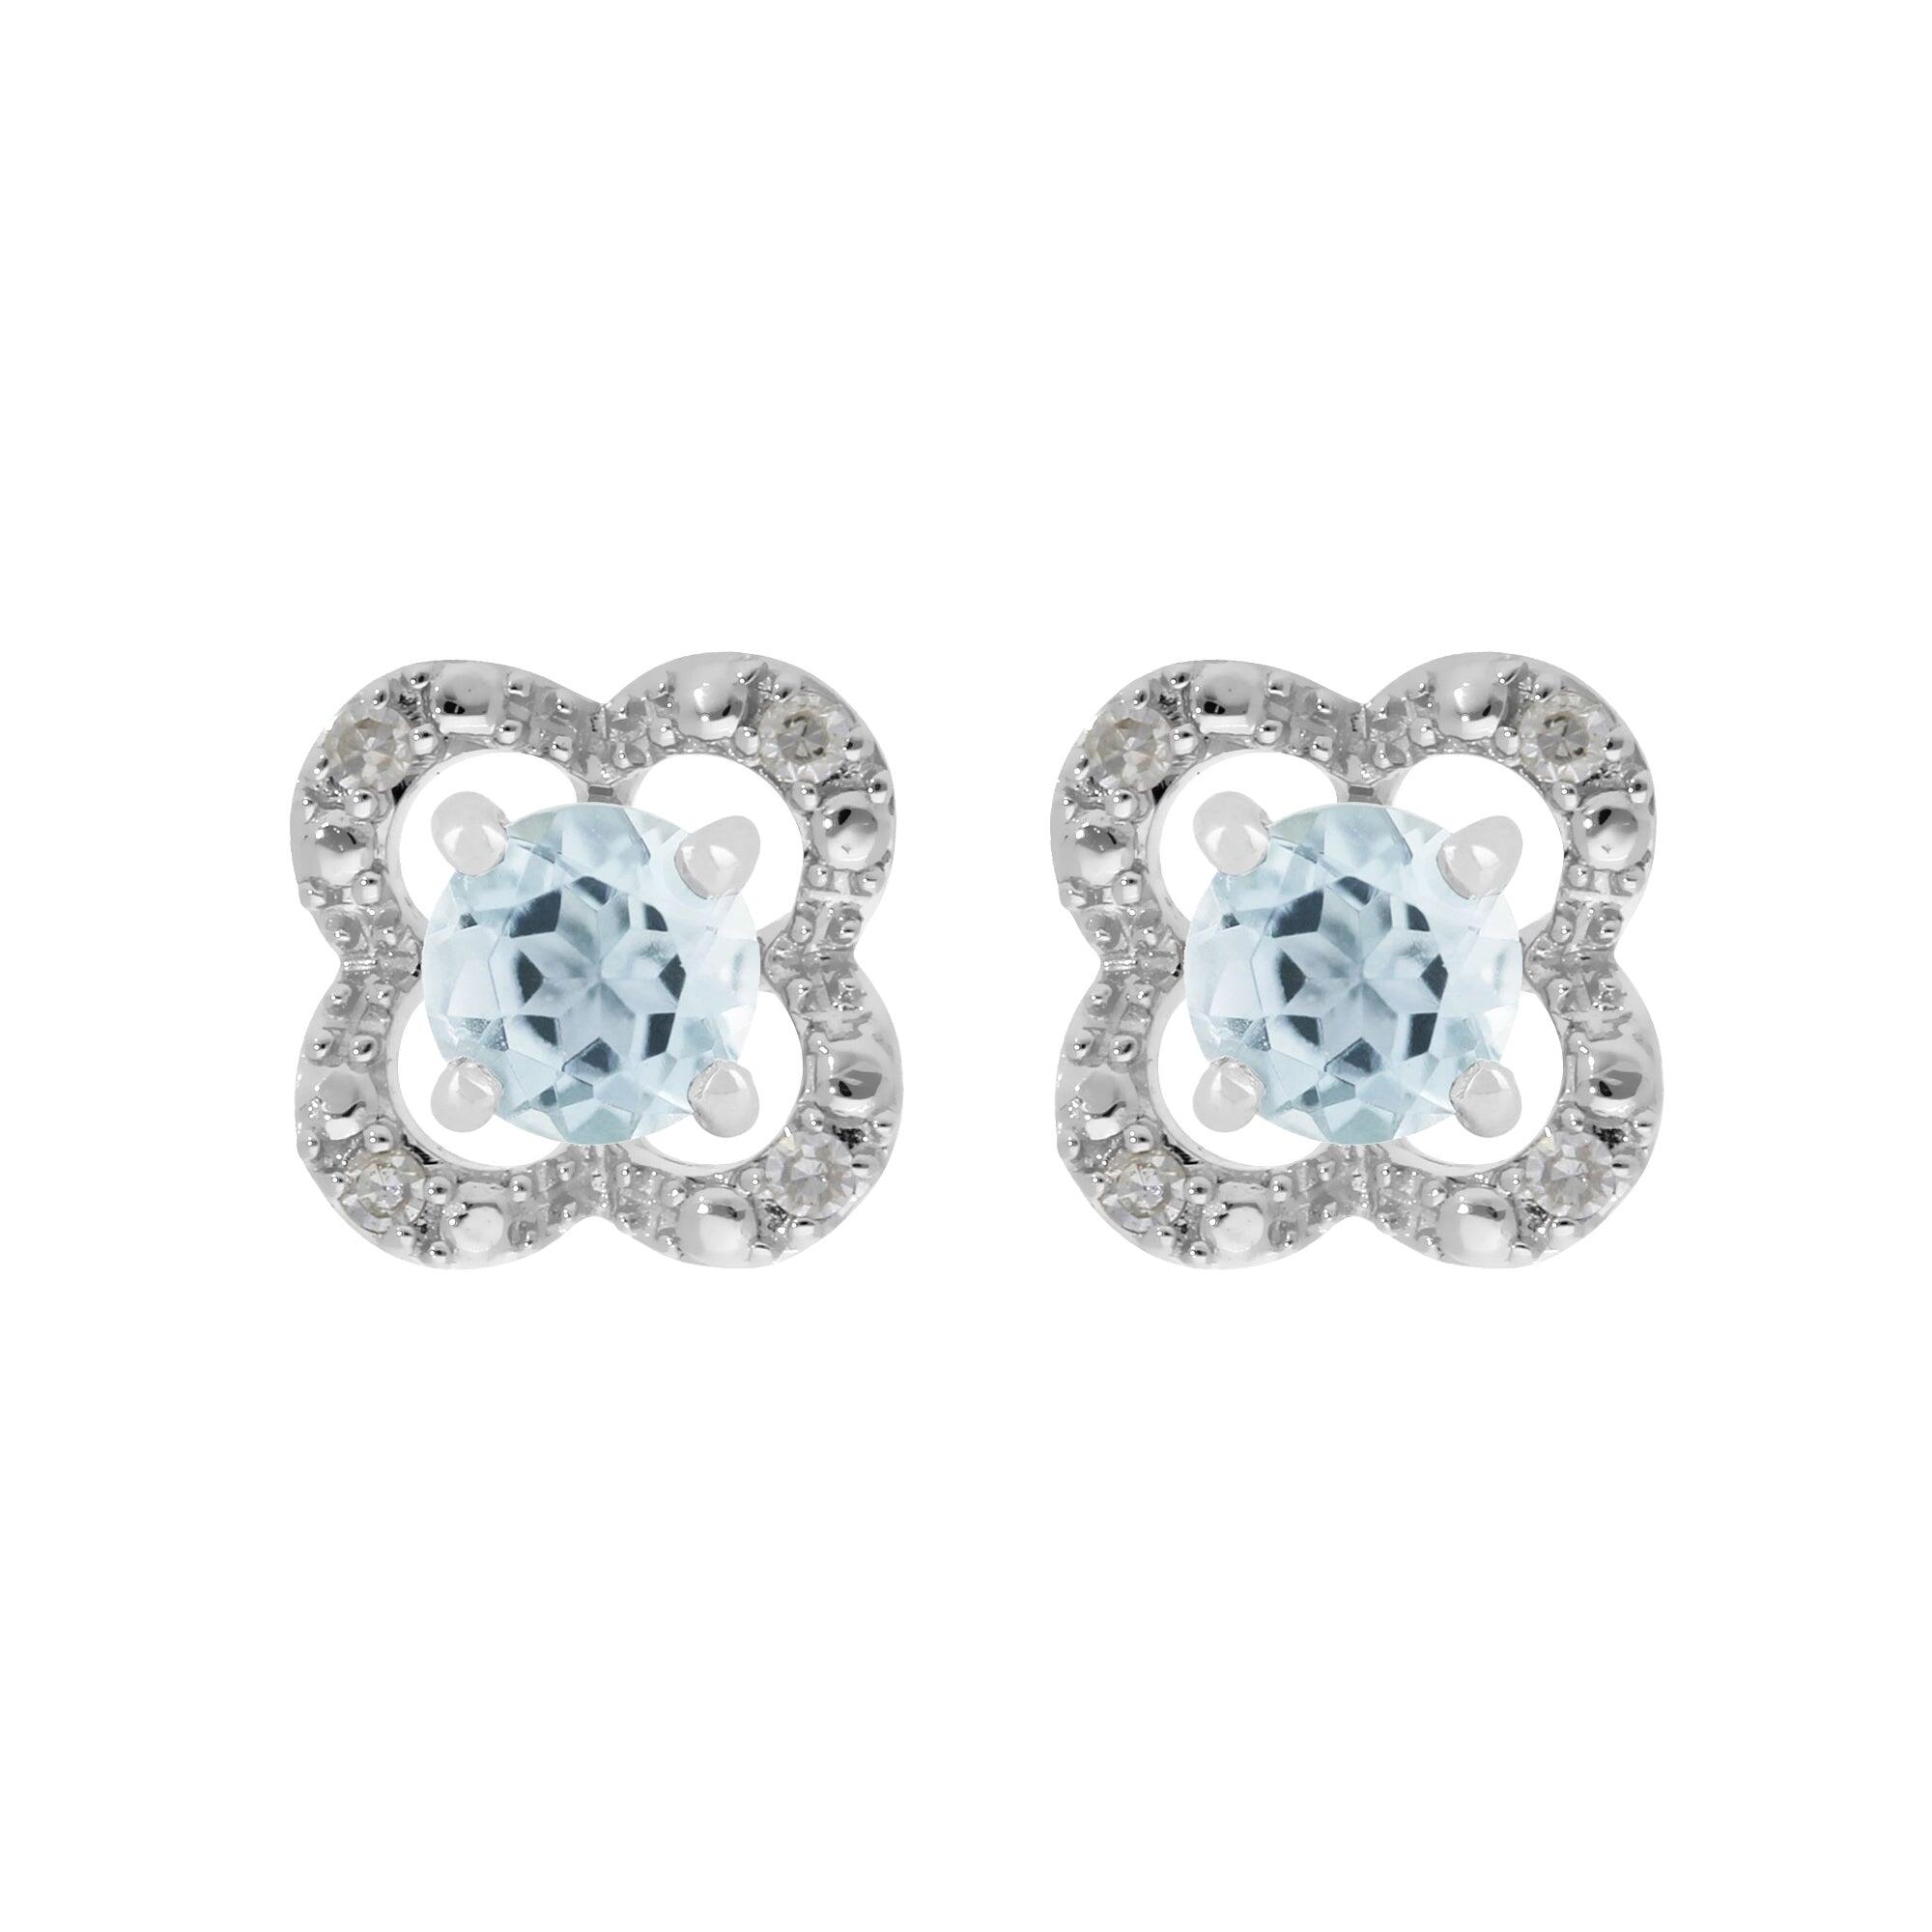 Classic Round Aquamarine Stud Earrings with Detachable Diamond Flower Ear Jacket in 9ct White Gold